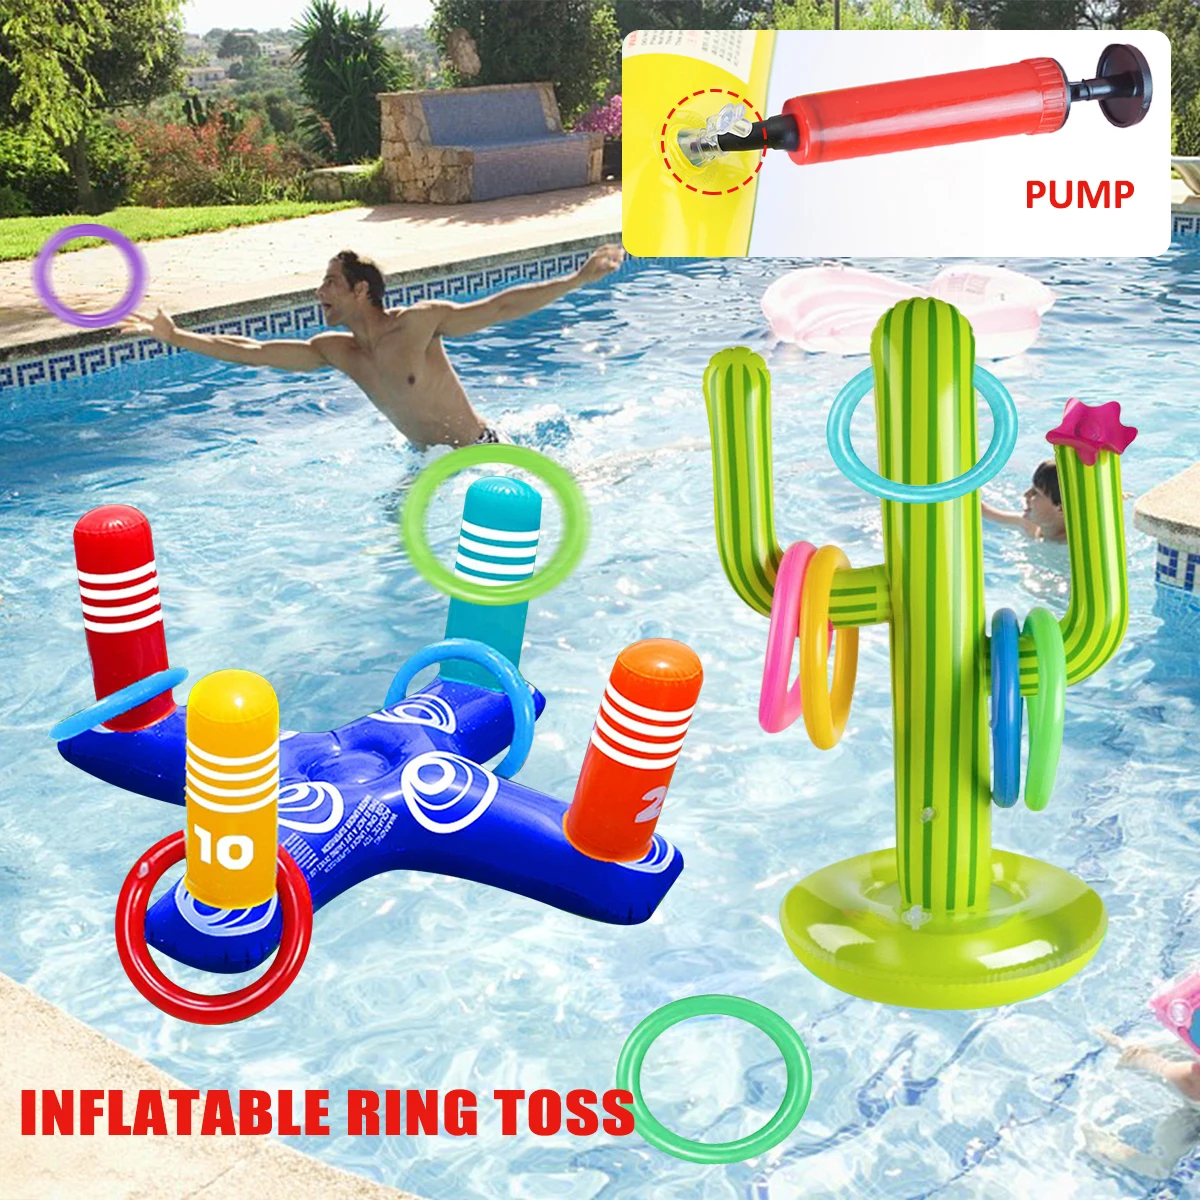 Inflatable Cactus Ring Throwing Pool Toy Game Set Summer Outdoor Pool Beach - £11.05 GBP